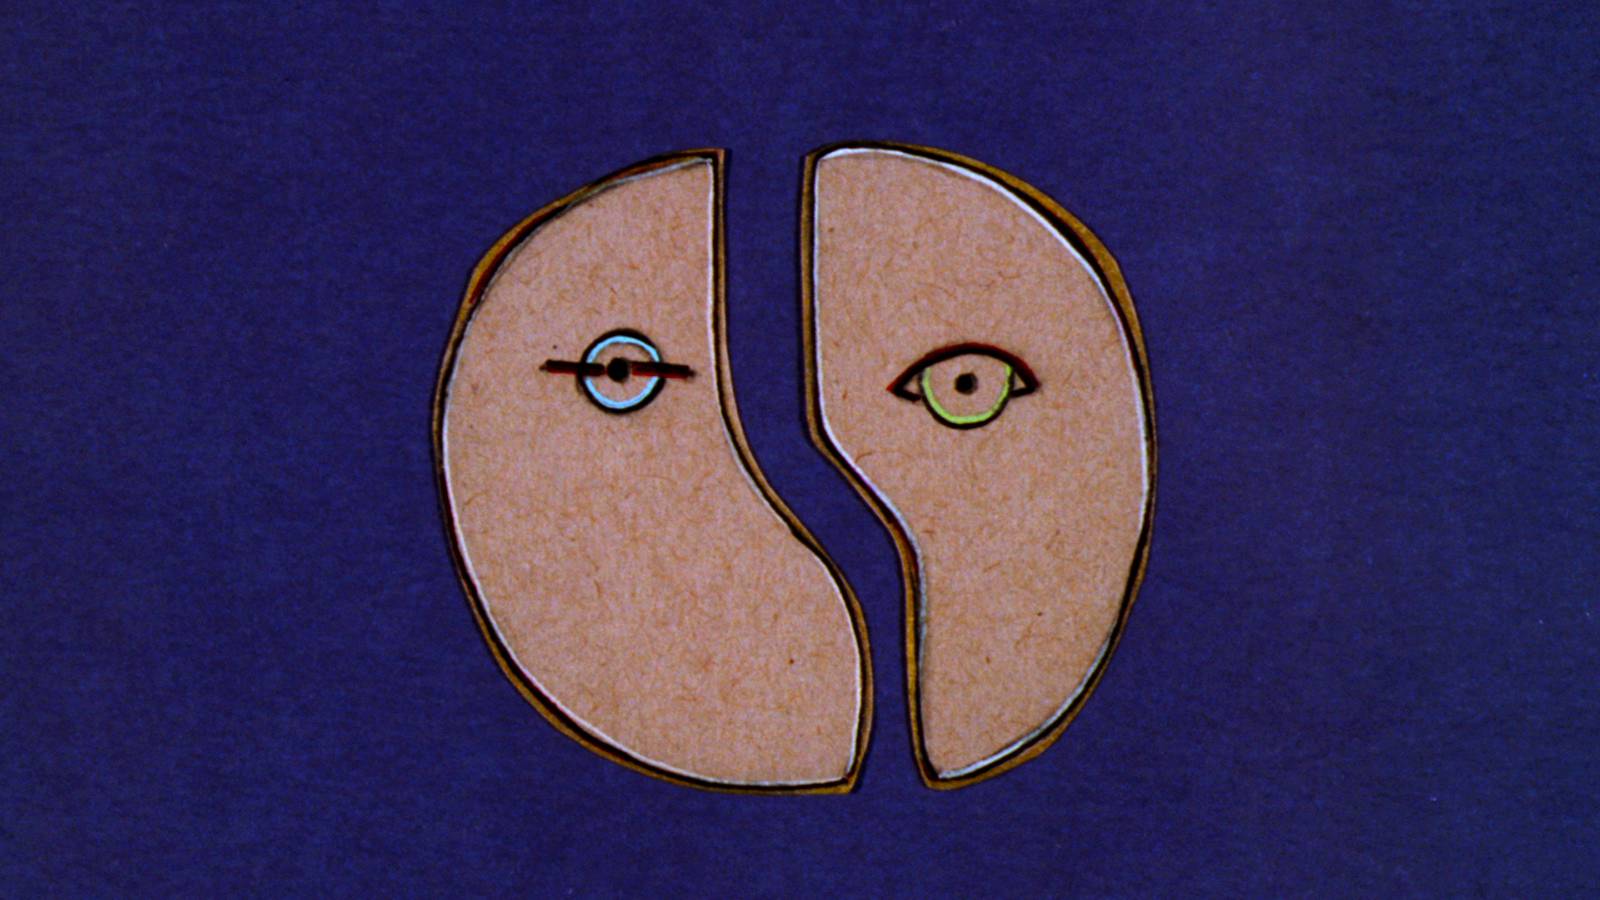 This is one of Hedwig's drawings that is seen during her performance of "The Origin of Love" in the movie "Hedwig and the Angry Inch." It shows two separated halves of the same face--one with a blue eye and one with a green.